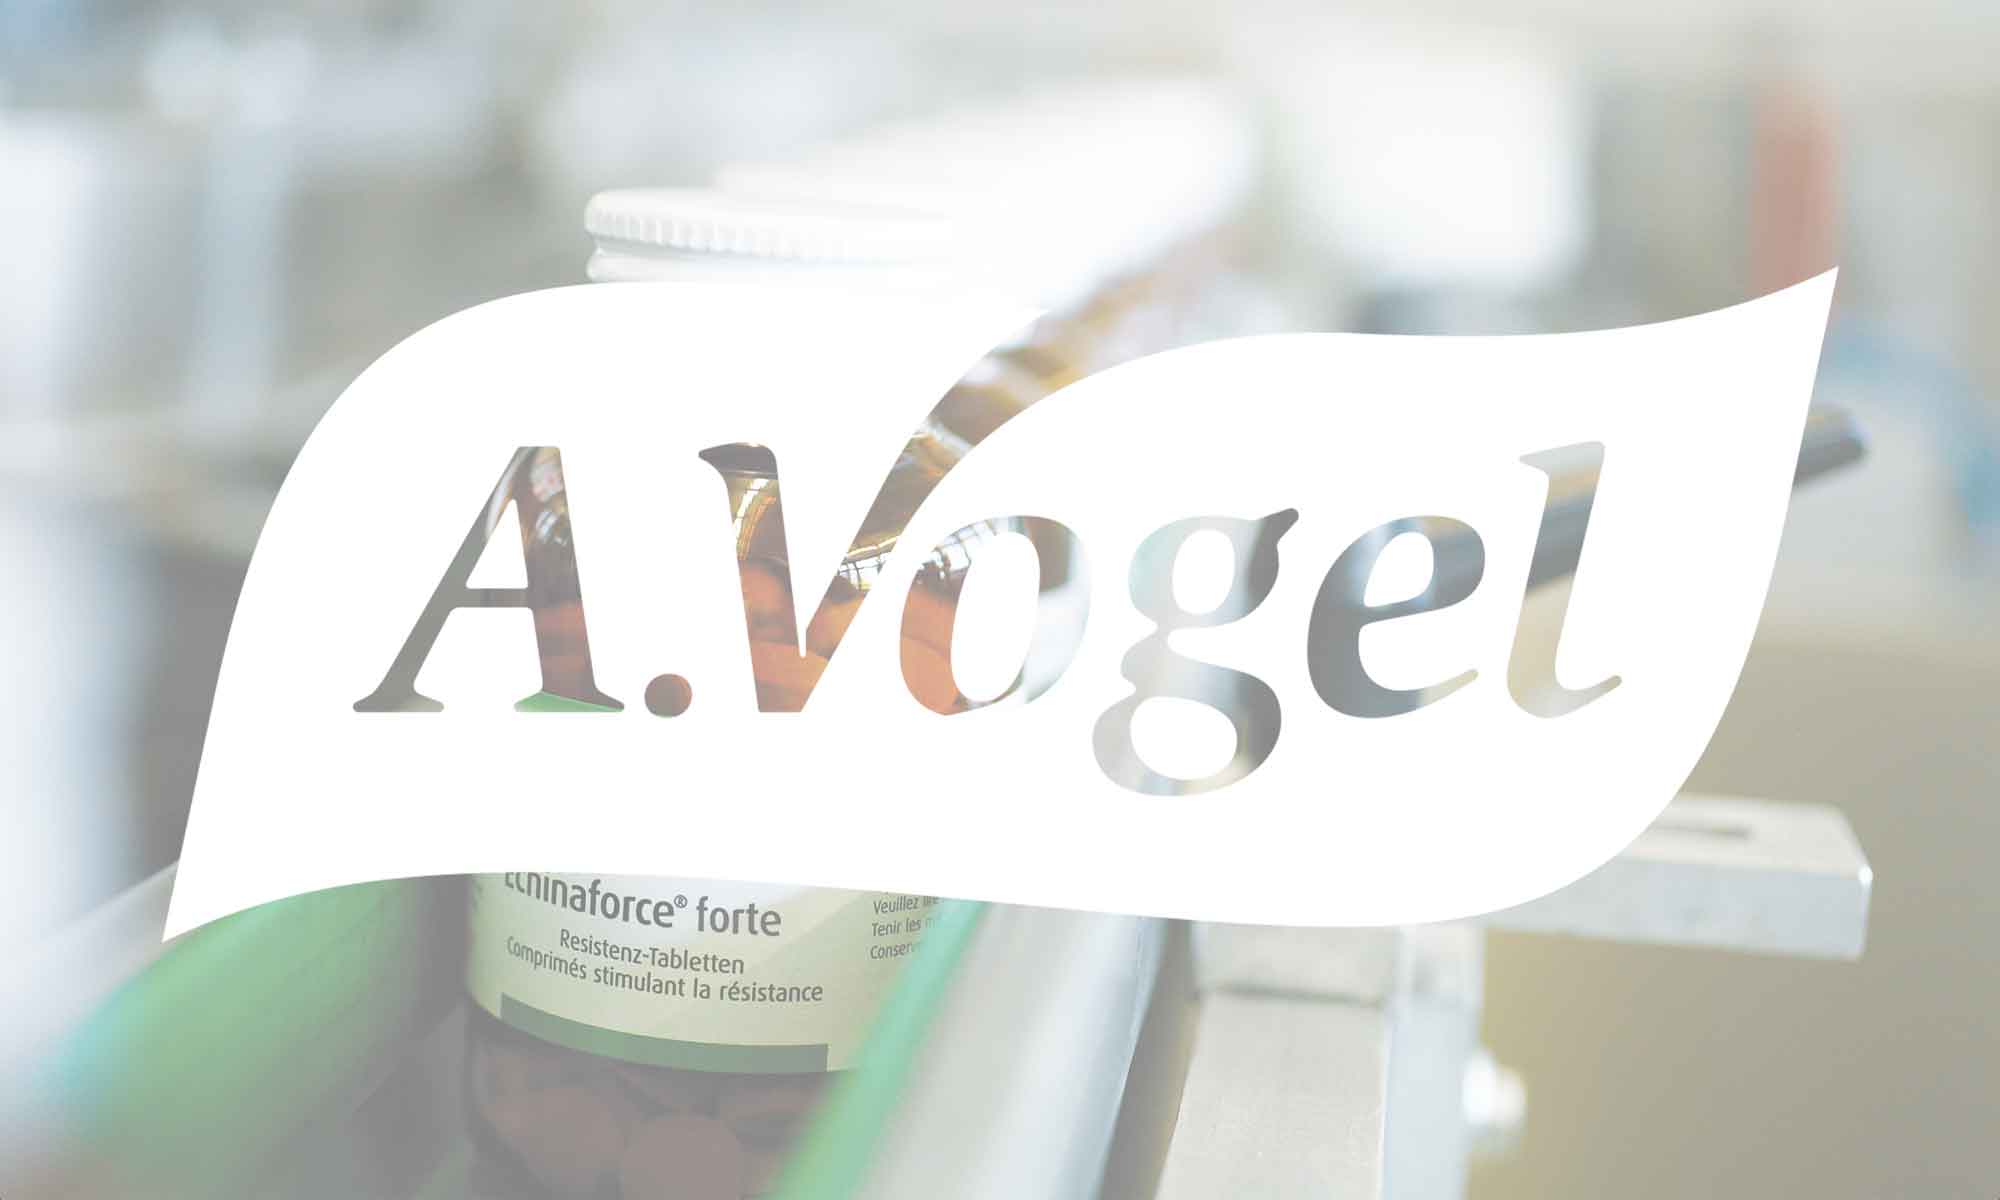 For A.Vogel, supplying retailers and wholesalers with its own product content was a strenuous task involving a great deal of manual effort and prone to errors. A universal system for product content management was missing, as was a standard for the data. This could lead to delays in the listing of products and in the creation of new retail products.